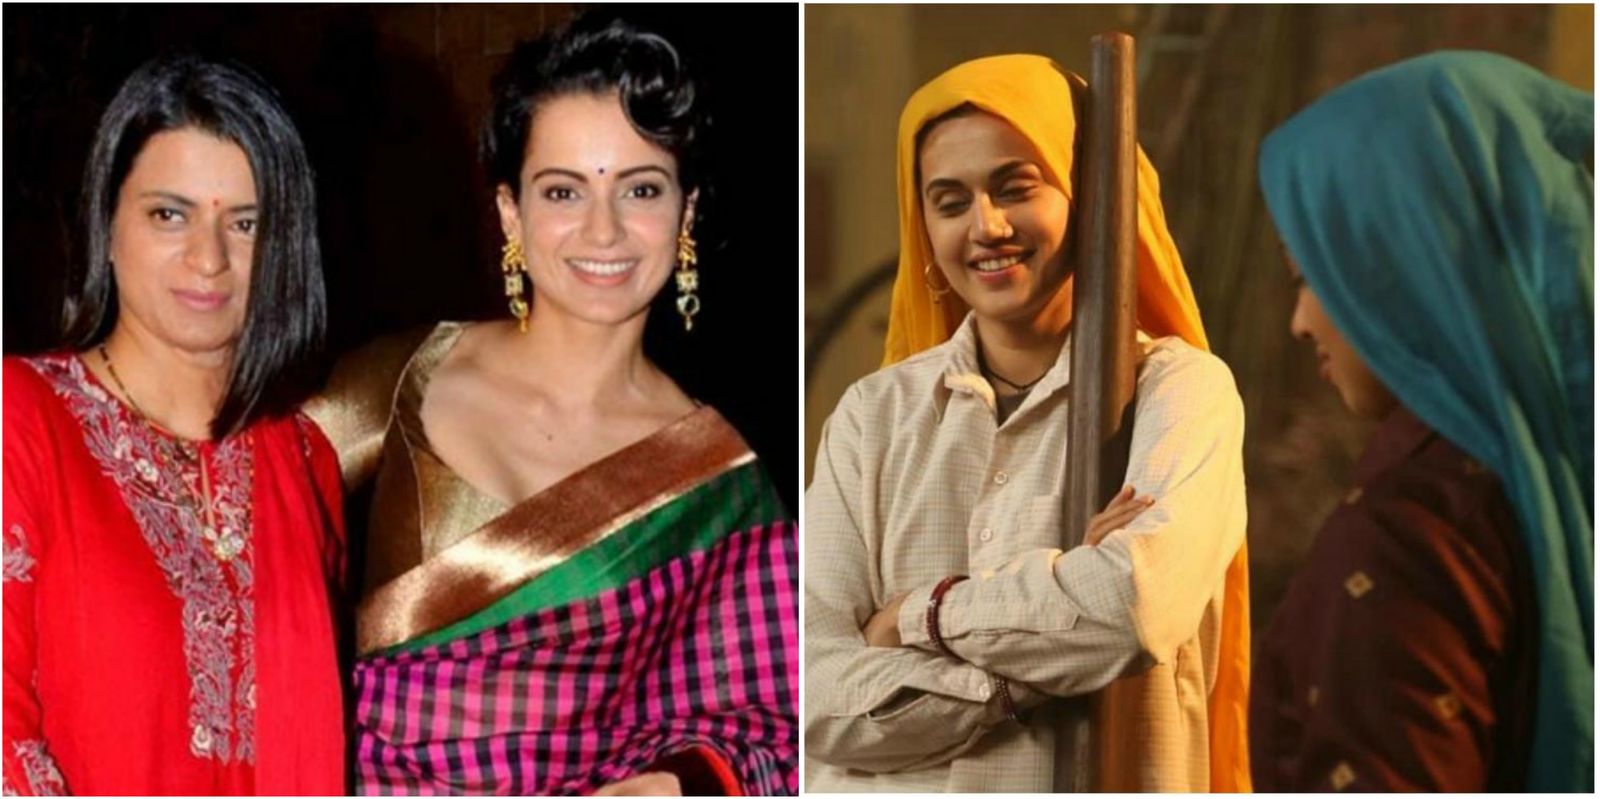 Taapsee Pannu Reacts To Kangana Ranaut’s Claim Of Saand Ki Aankh Being Offered To Her First